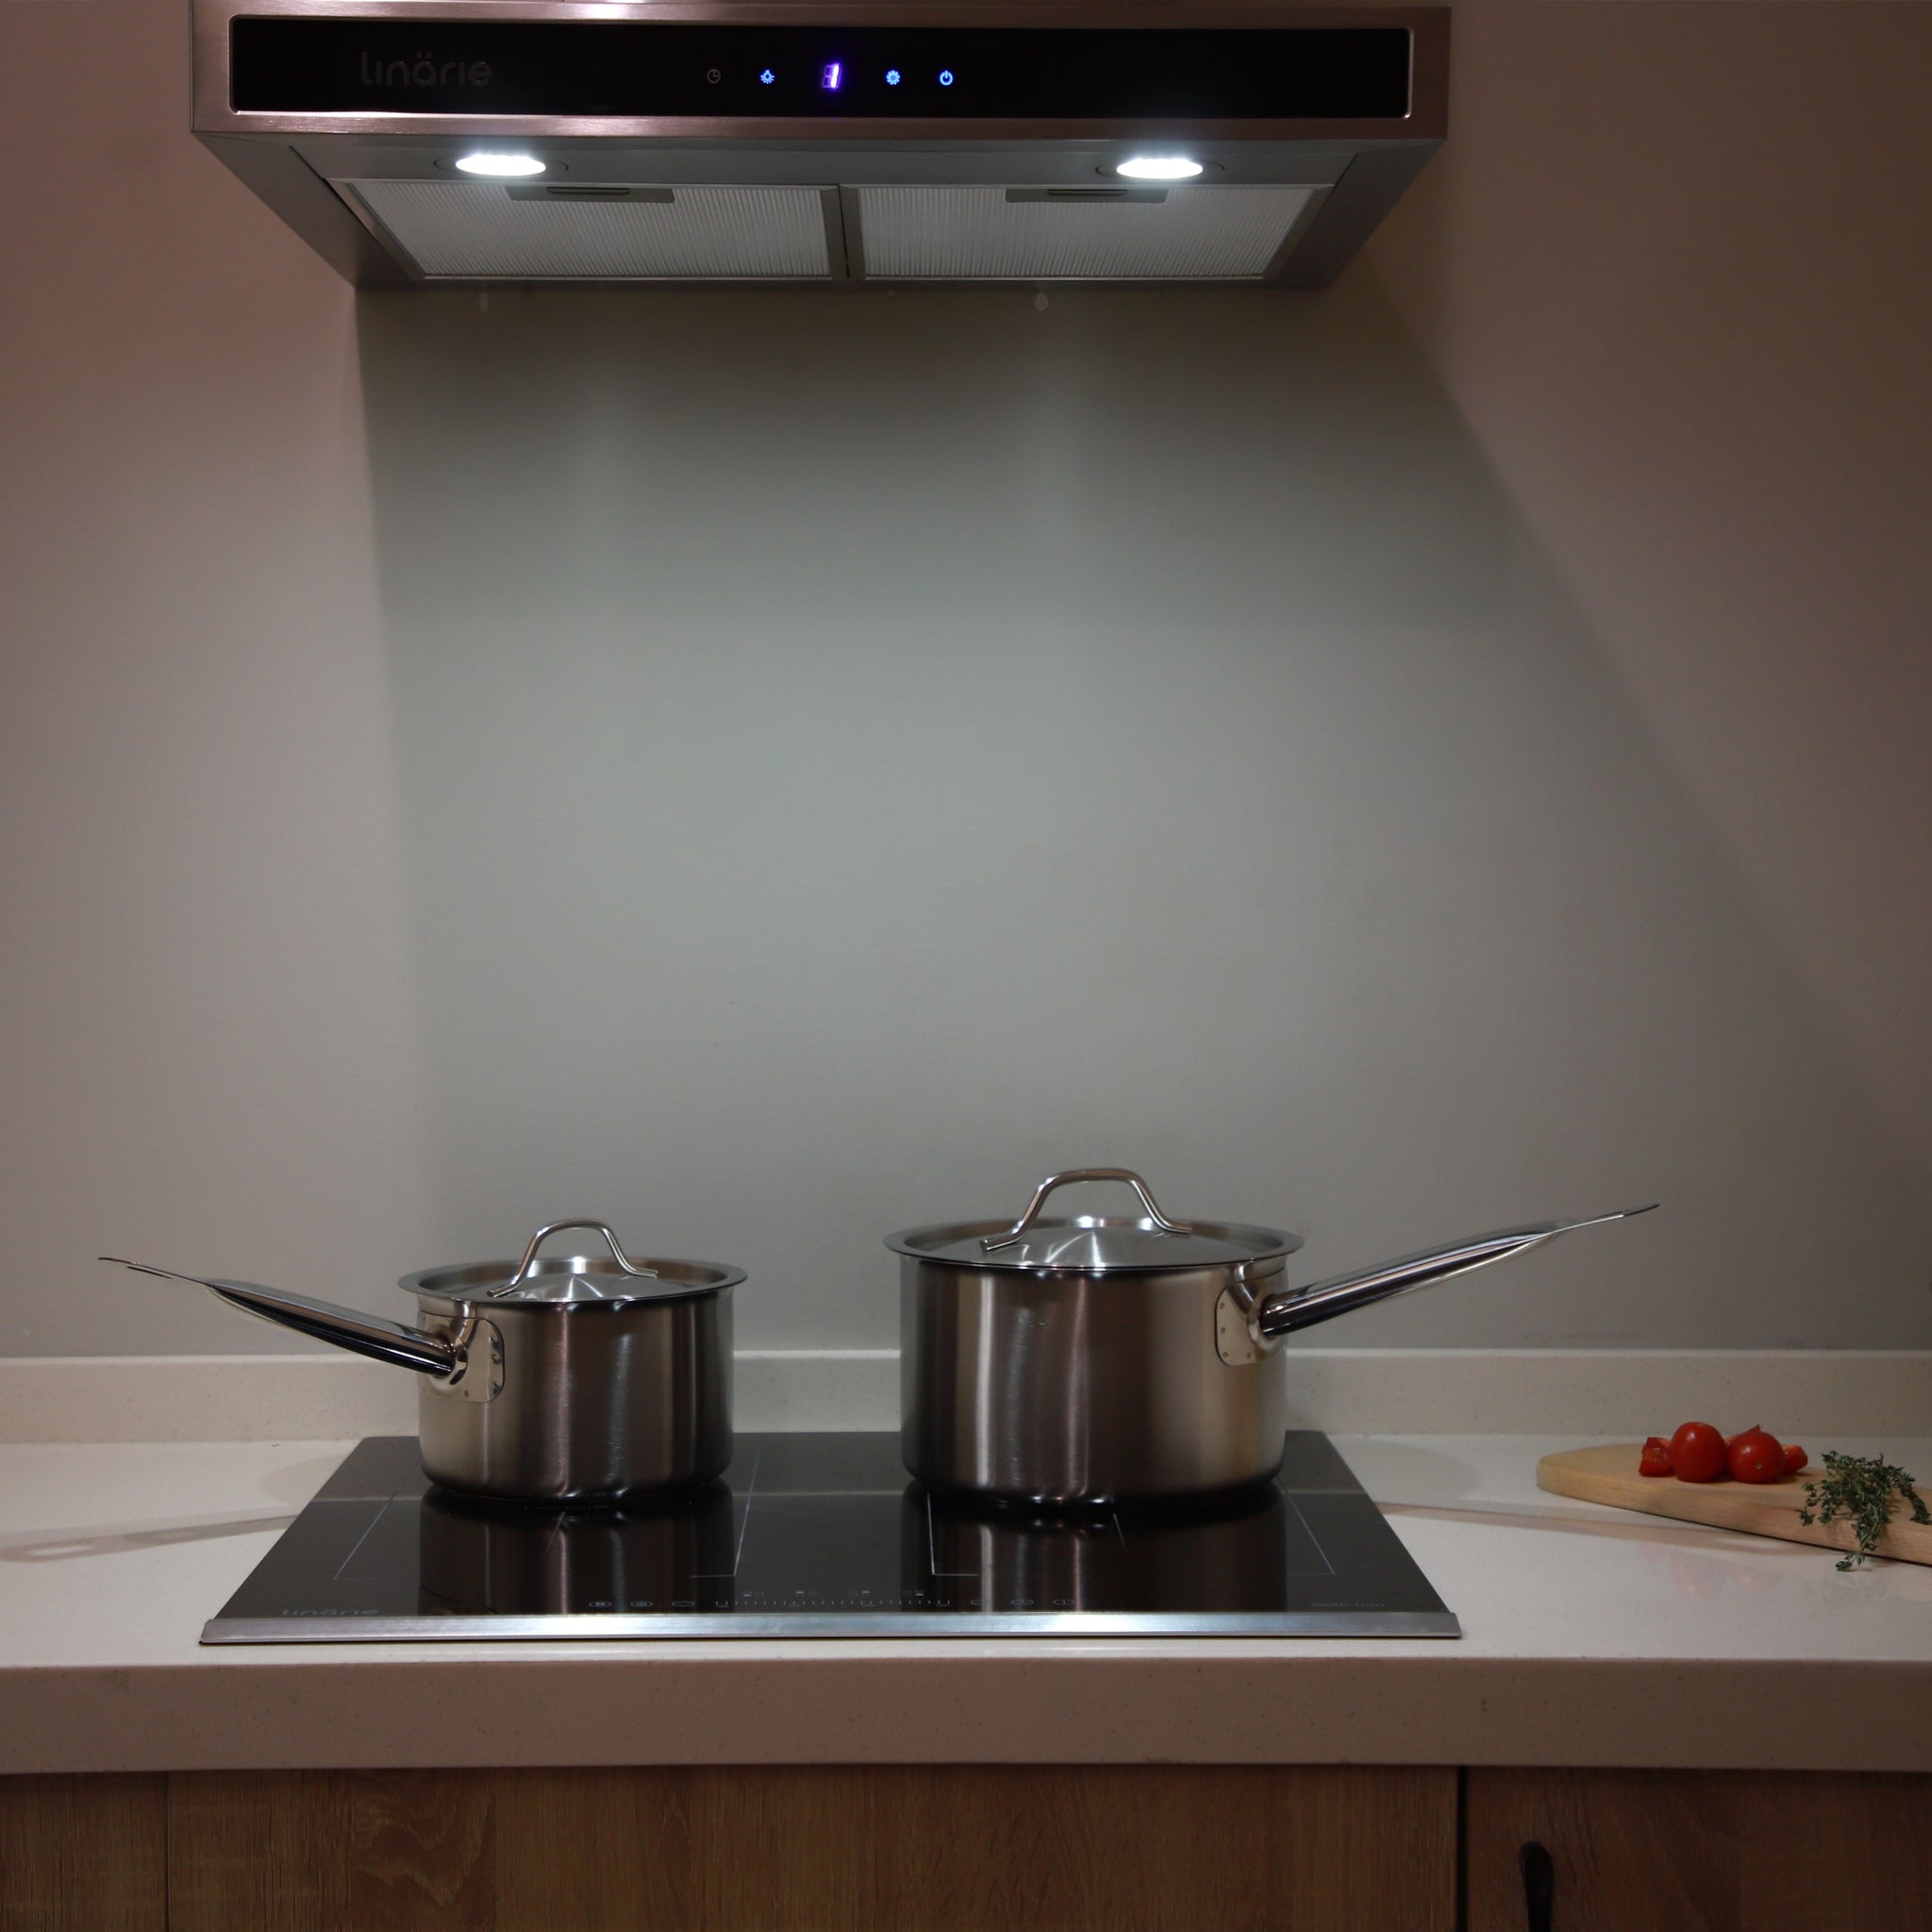 Linarie | Narbonne 60cm Canopy Wall-Mounted Rangehood Gesture Control RAHTS60XN